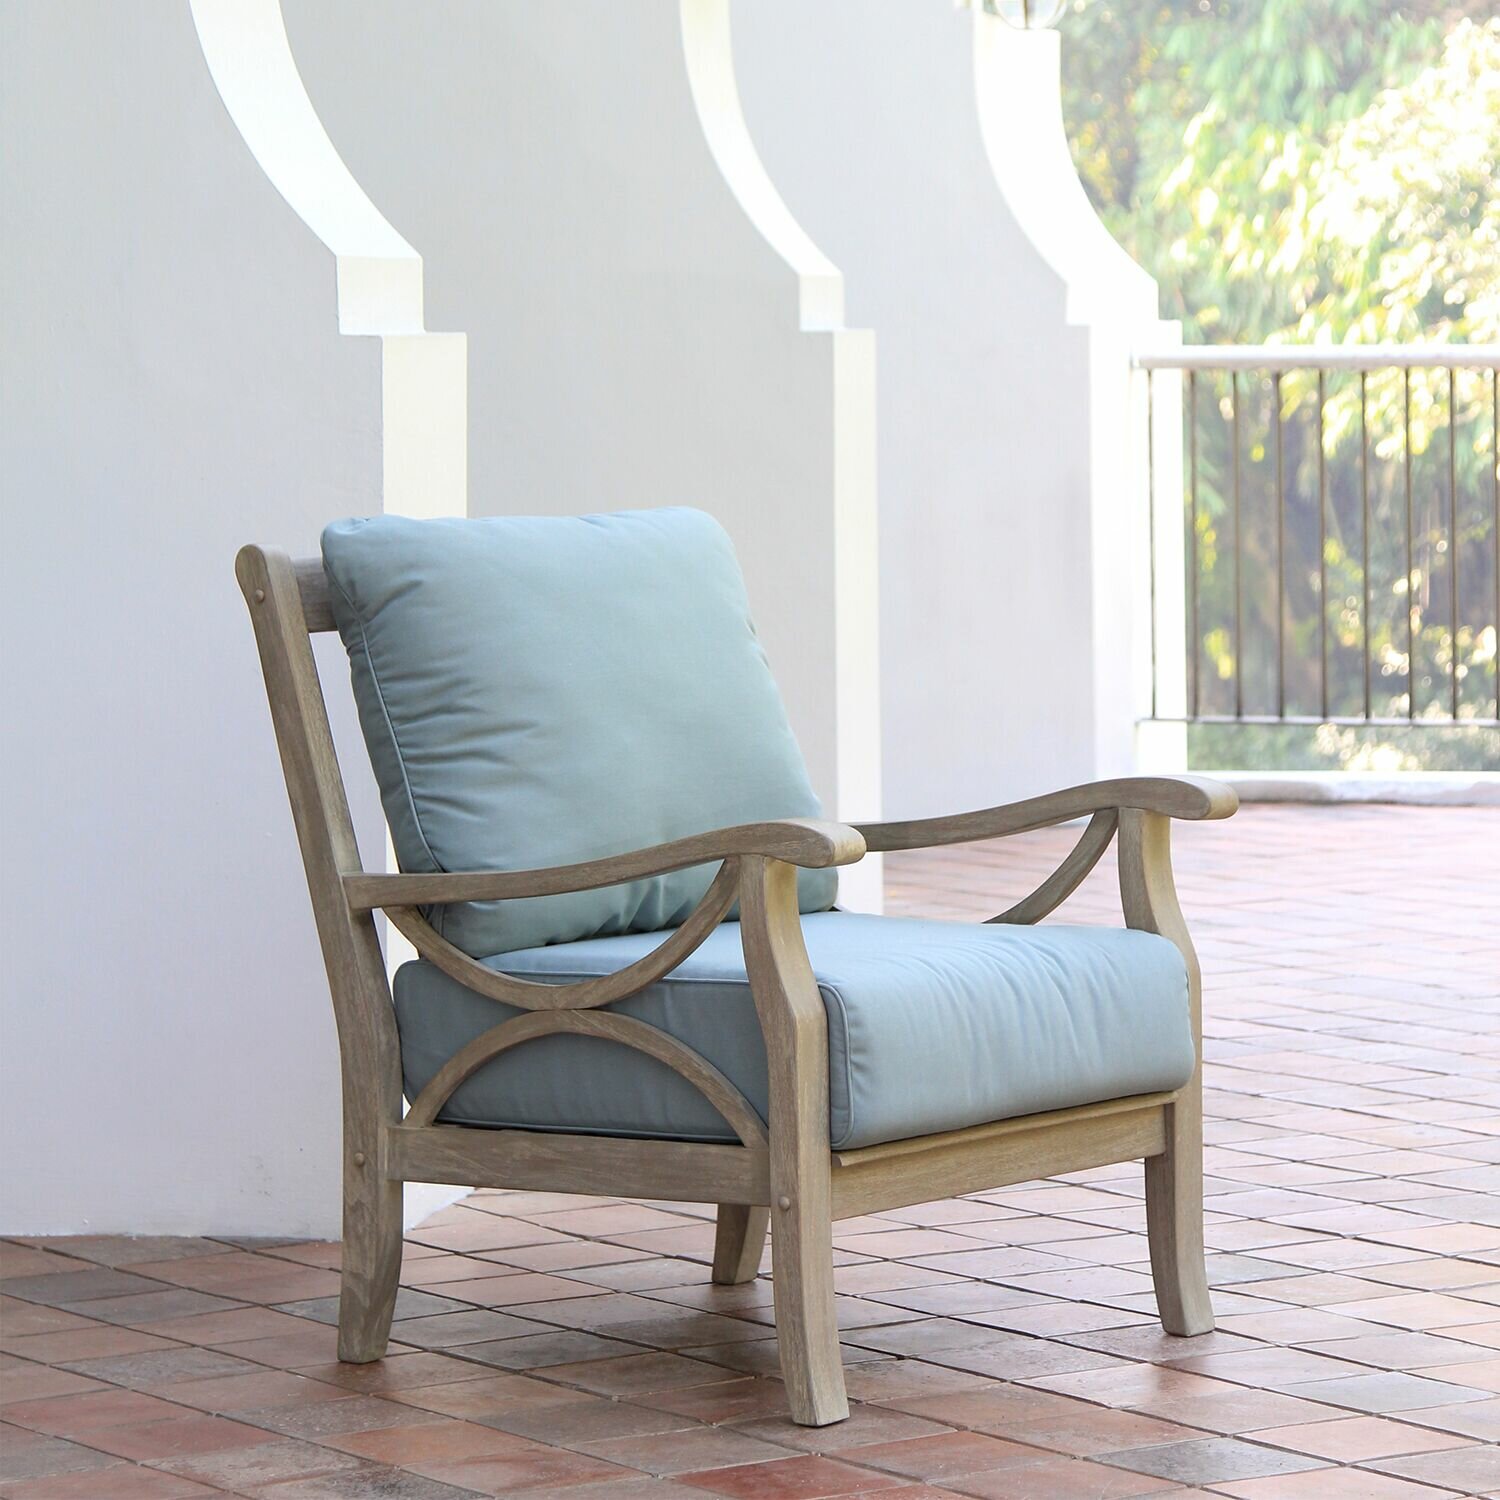 Brunswick Teak Patio Chair with Cushions, Pieces Included: 1 Chair, : 11" - image 1 of 7